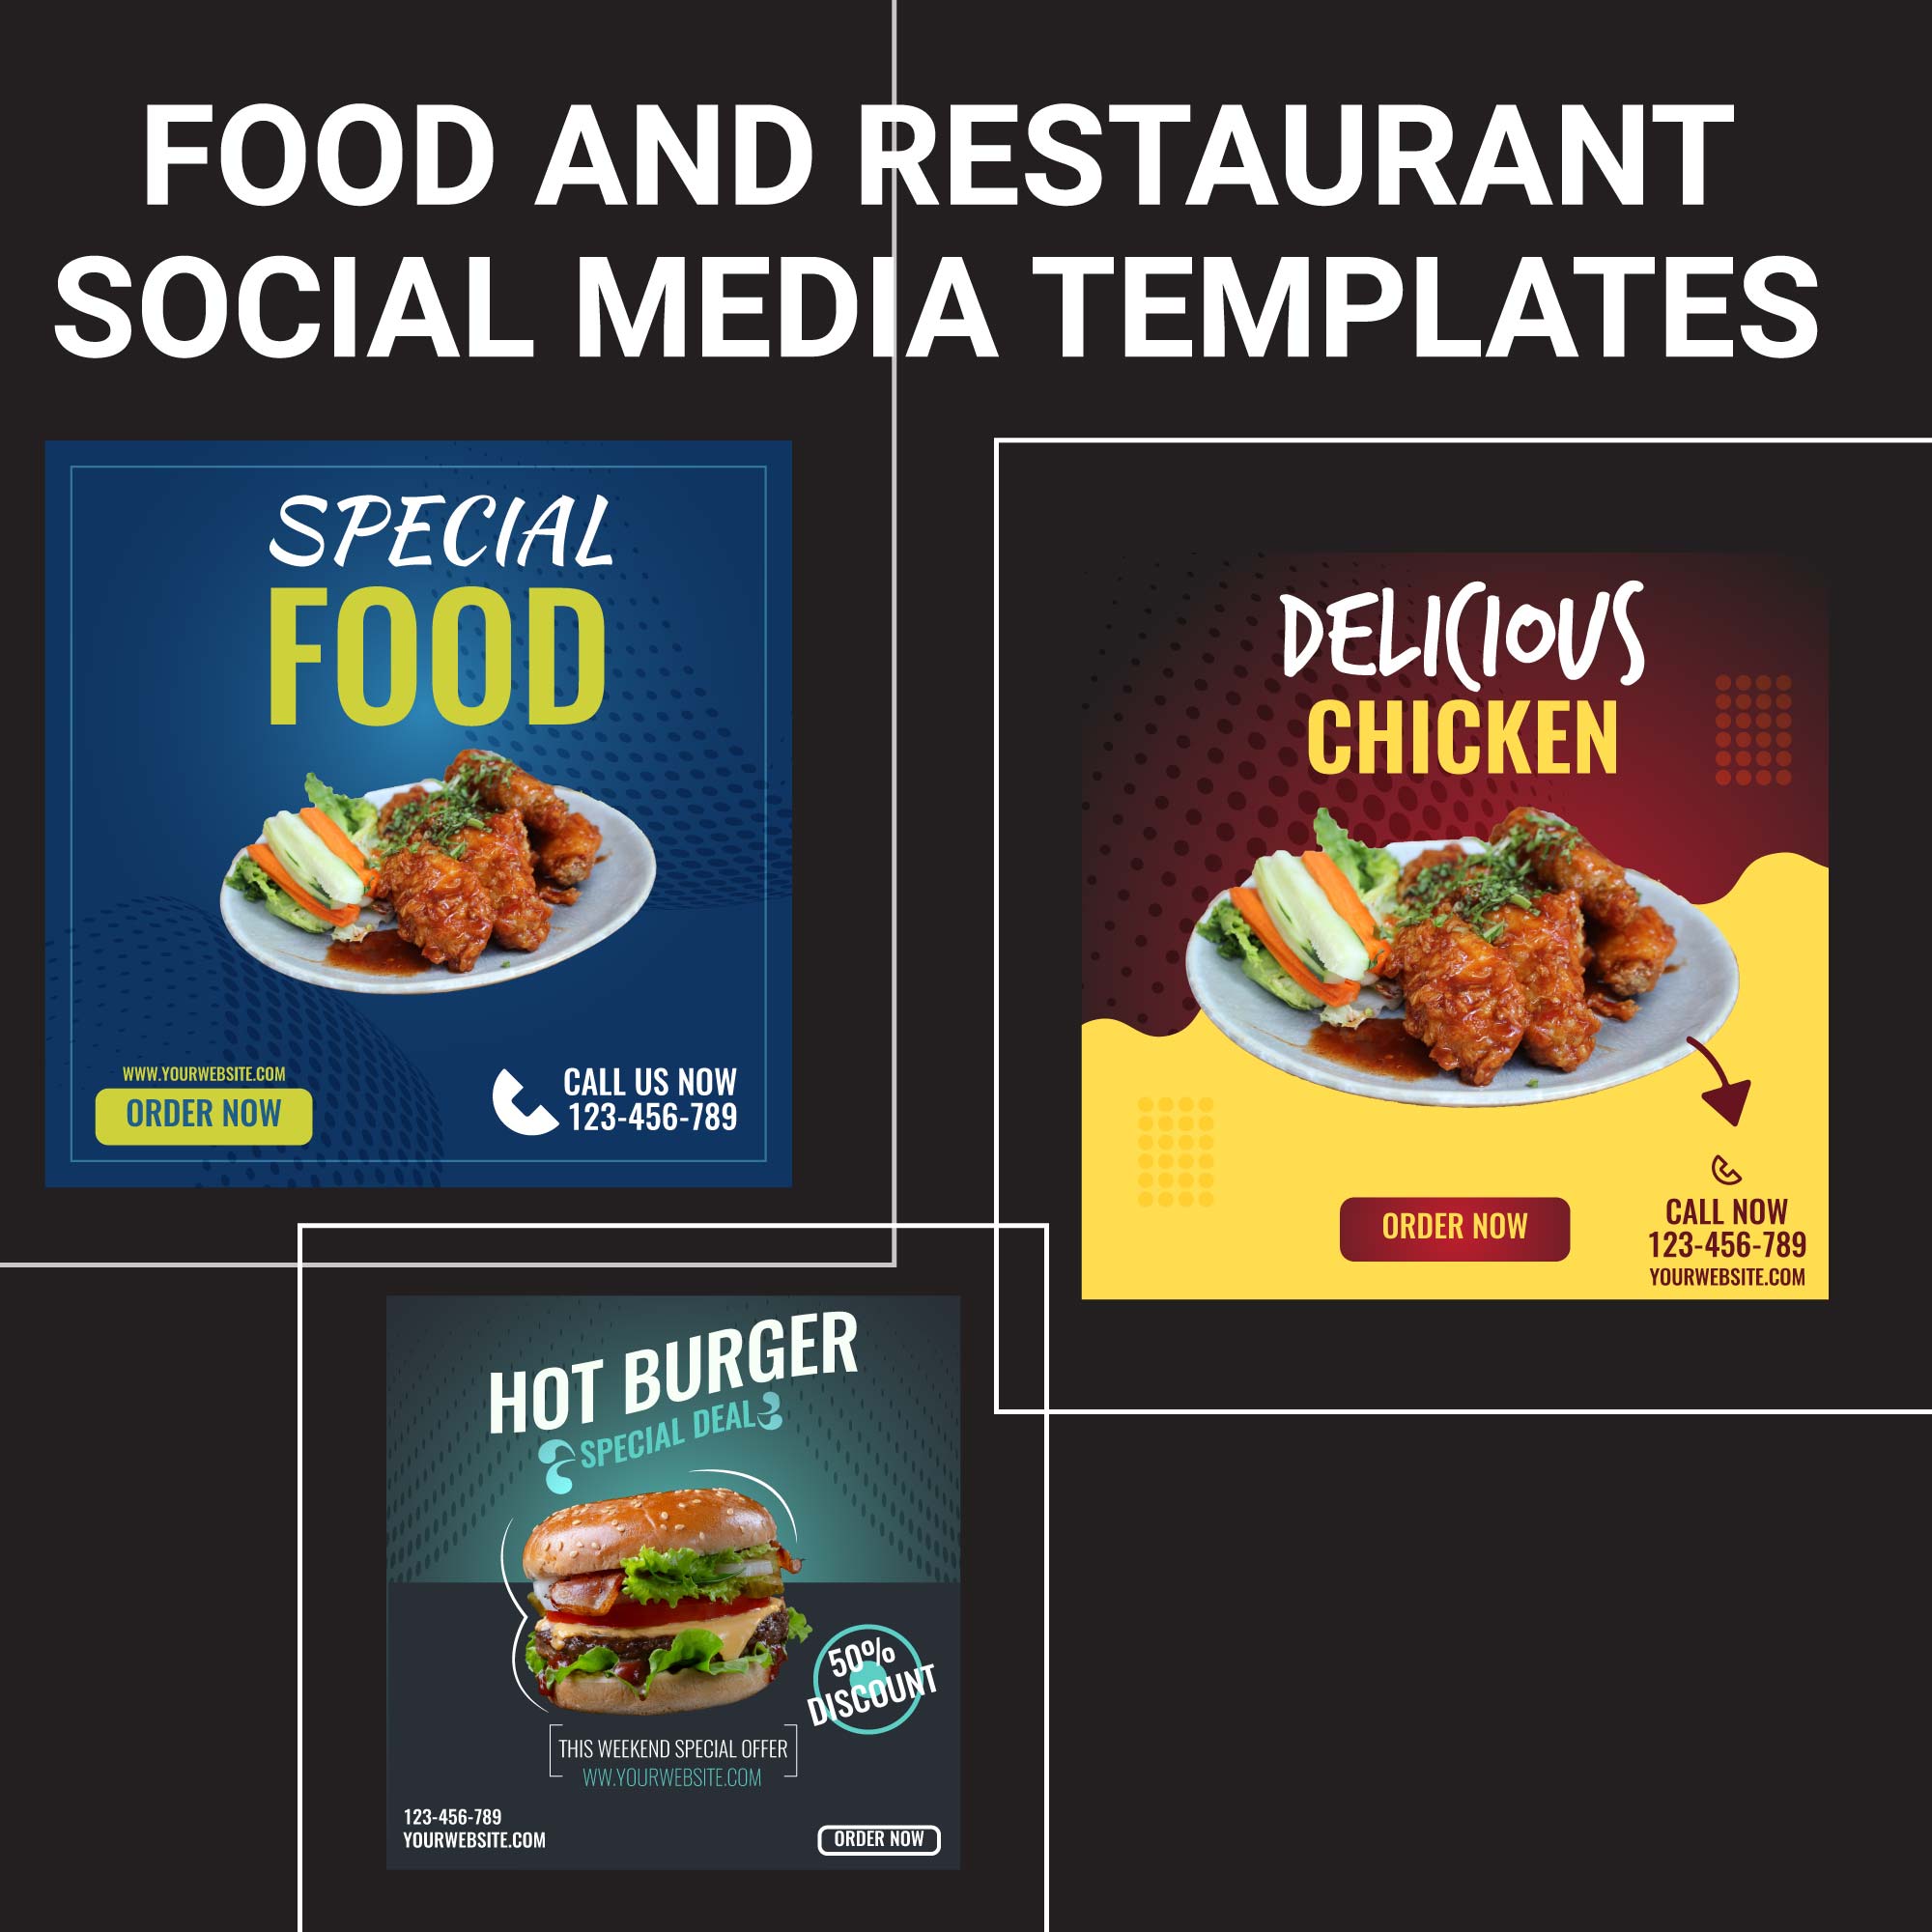 Food and restaurant social media templates cover image.